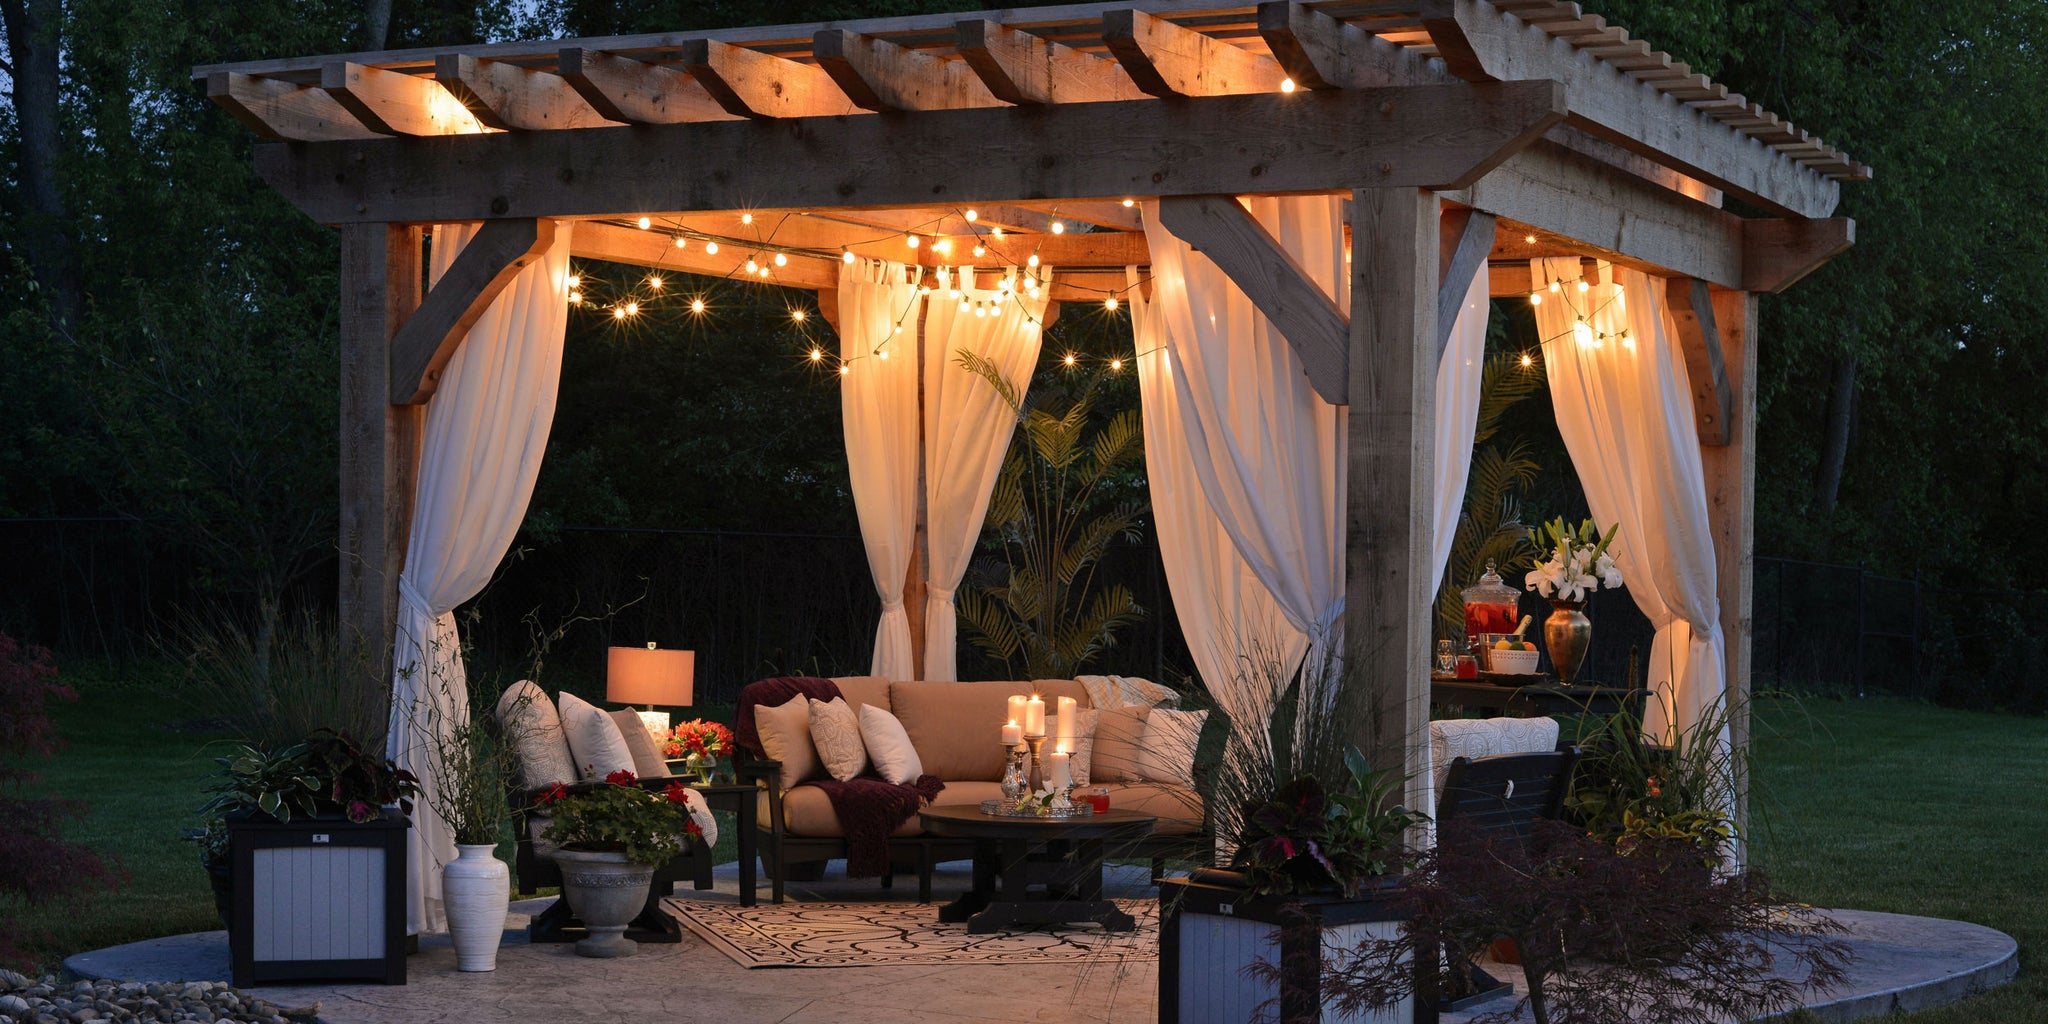 Simple Ways to Spruce Up Your Patio | Patio Essentials